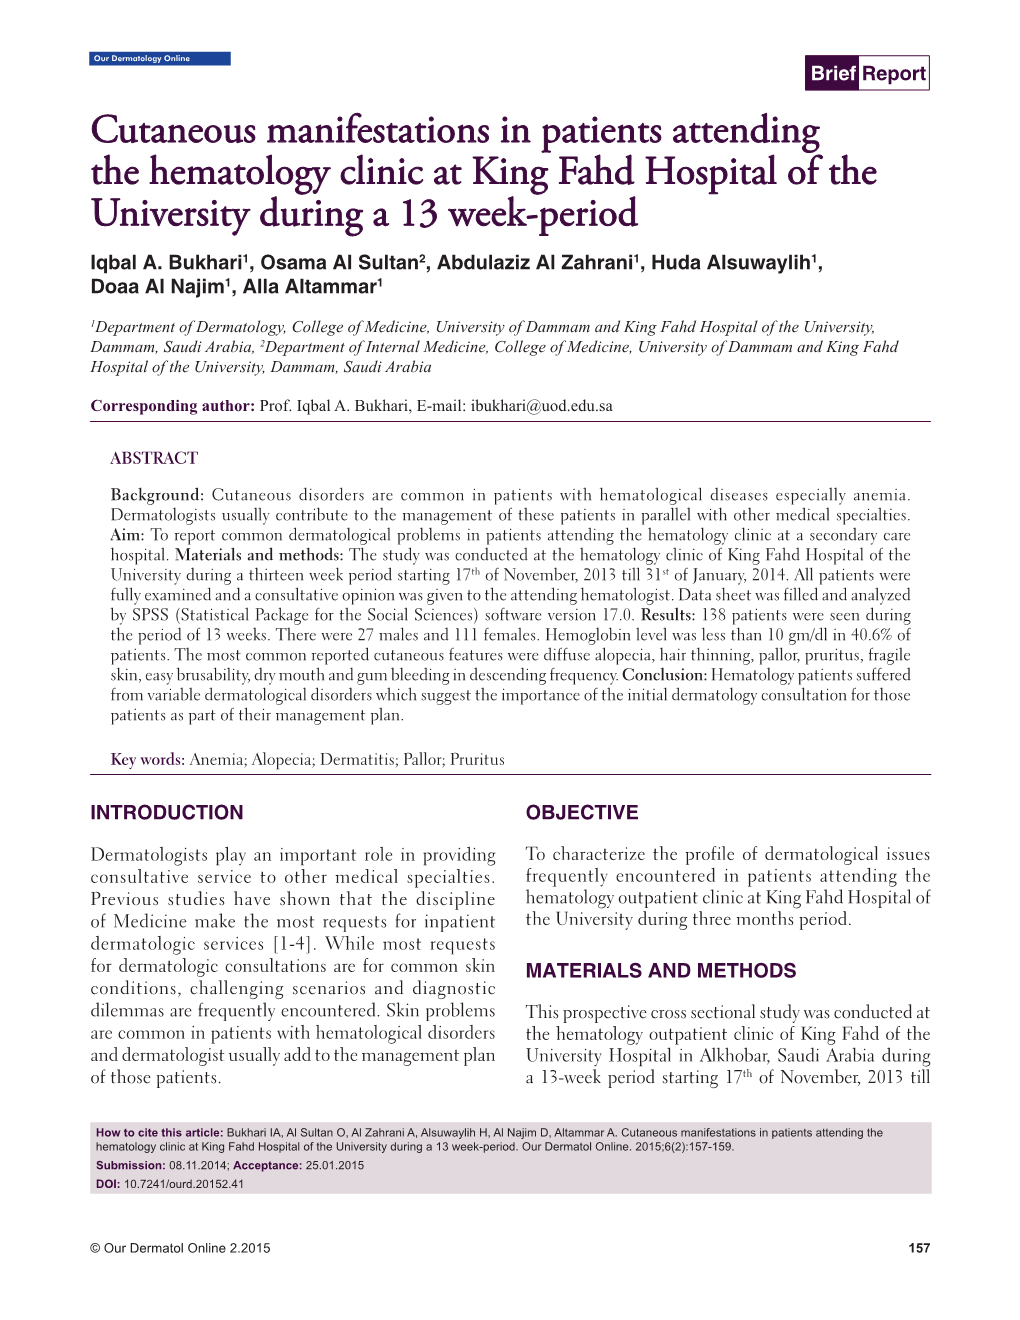 Cutaneous Manifestations in Patients Attending the Hematology Clinic at King Fahd Hospital of the University During a 13 Week-Period Iqbal A